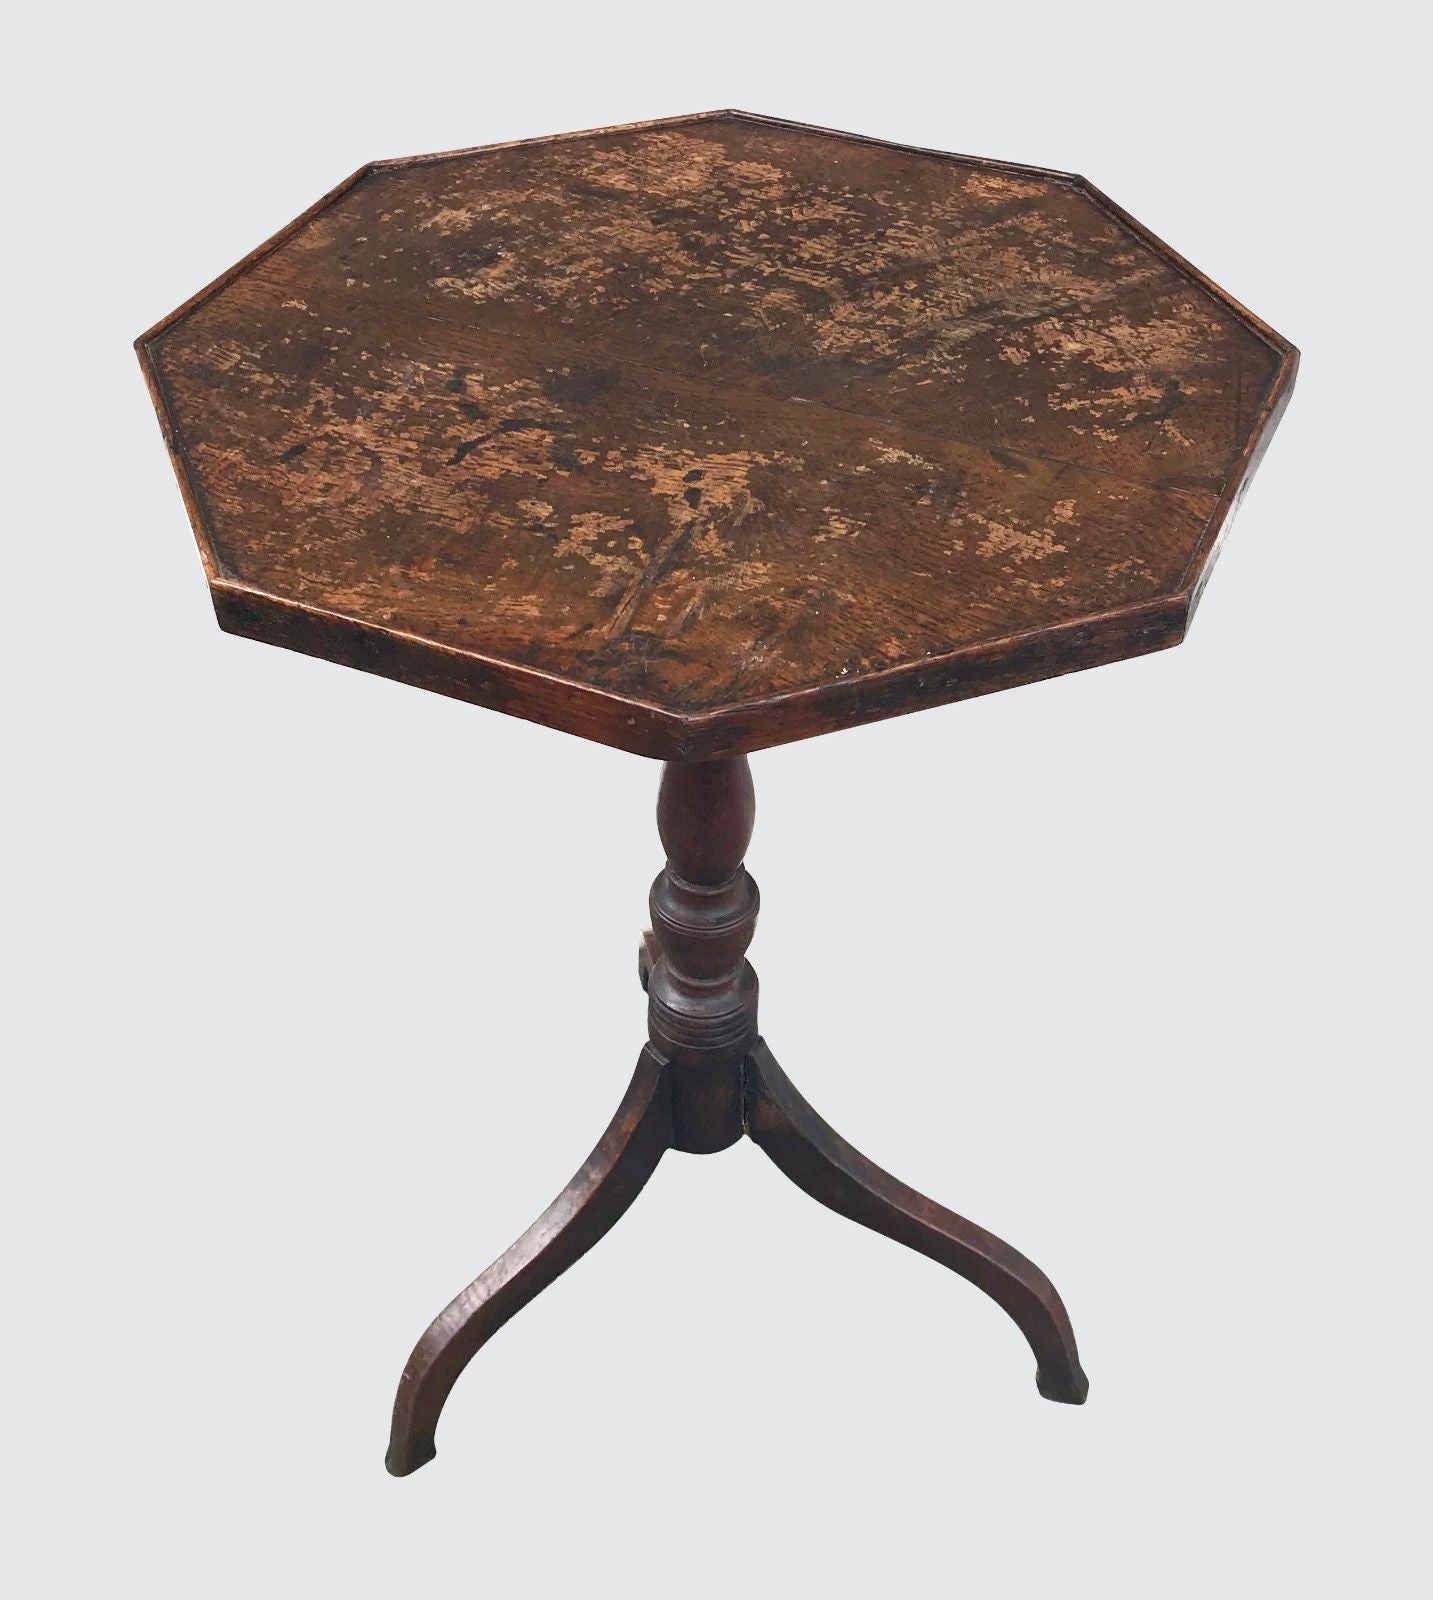 EARLY 19TH C GEORGE III OCTAGONAL YEW WOOD CANDLE STAND IN ORIGINAL SURFACE